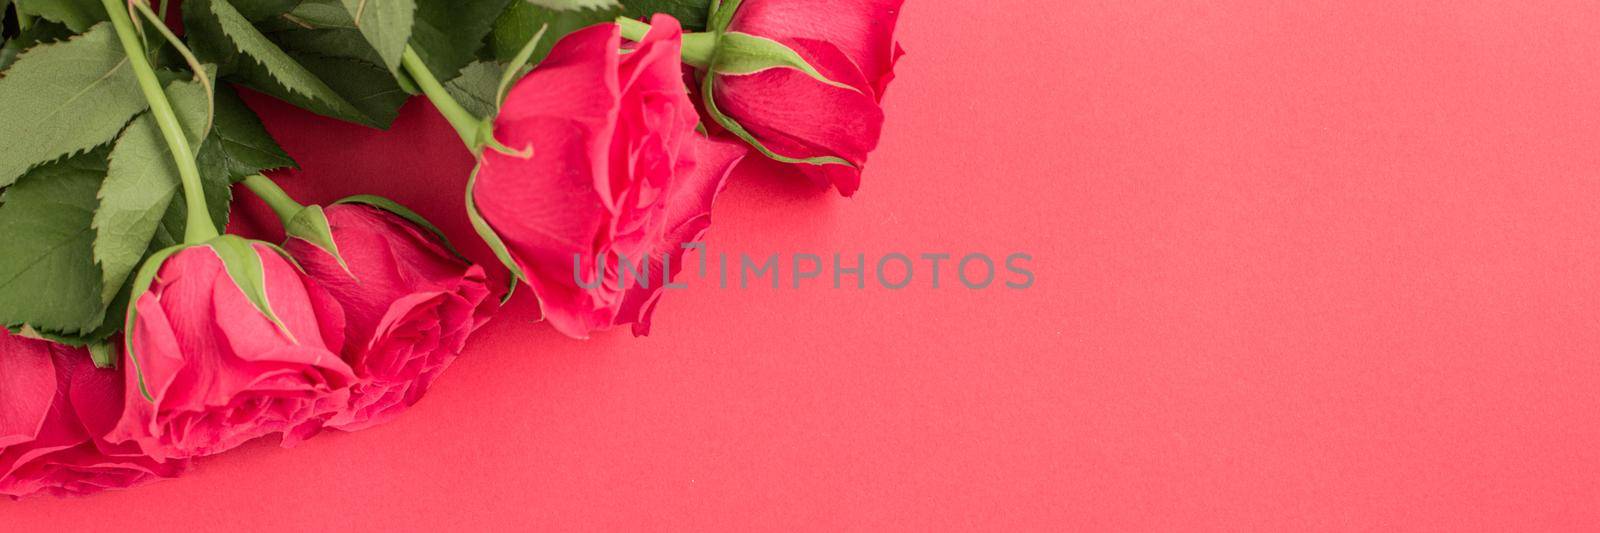 Minimal creative fresh roses on a pastel pink background. Gift concept for Valentine's Day, Wedding or Birthday, banner format. copyspace for text. Flatlay.